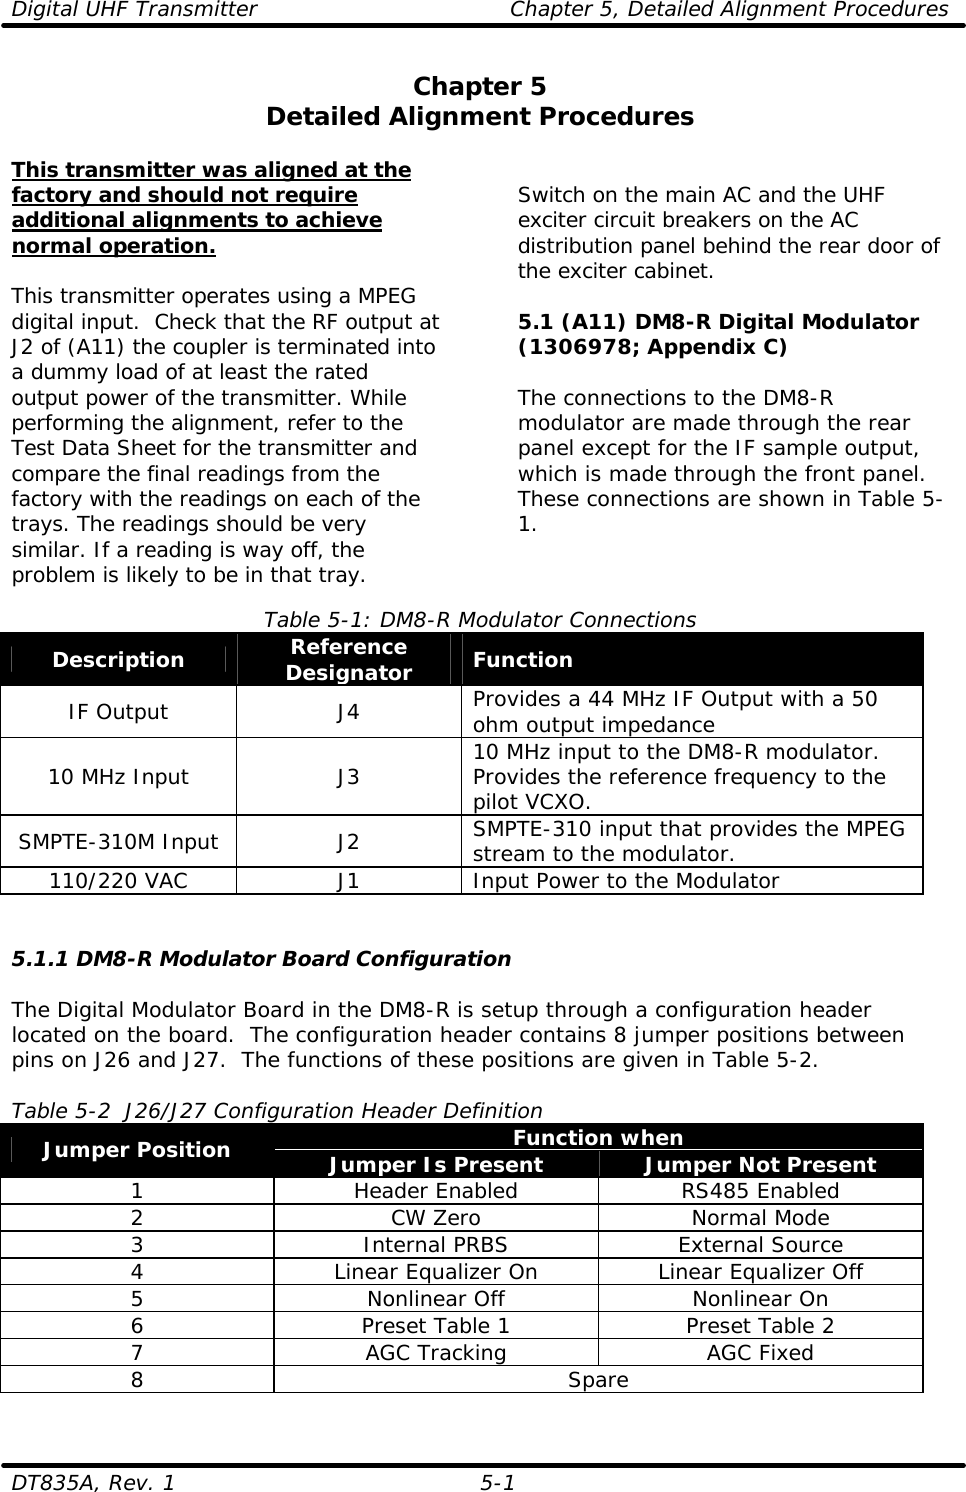 Digital UHF Transmitter    Chapter 5, Detailed Alignment Procedures DT835A, Rev. 1 5-1   Chapter 5 Detailed Alignment Procedures  This transmitter was aligned at the factory and should not require additional alignments to achieve normal operation.  This transmitter operates using a MPEG digital input.  Check that the RF output at J2 of (A11) the coupler is terminated into a dummy load of at least the rated output power of the transmitter. While performing the alignment, refer to the Test Data Sheet for the transmitter and compare the final readings from the factory with the readings on each of the trays. The readings should be very similar. If a reading is way off, the problem is likely to be in that tray.  Switch on the main AC and the UHF exciter circuit breakers on the AC distribution panel behind the rear door of the exciter cabinet.  5.1 (A11) DM8-R Digital Modulator (1306978; Appendix C)  The connections to the DM8-R modulator are made through the rear panel except for the IF sample output, which is made through the front panel. These connections are shown in Table 5-1.   Table 5-1: DM8-R Modulator Connections Description Reference Designator Function IF Output J4 Provides a 44 MHz IF Output with a 50 ohm output impedance 10 MHz Input J3 10 MHz input to the DM8-R modulator.  Provides the reference frequency to the pilot VCXO. SMPTE-310M Input J2 SMPTE-310 input that provides the MPEG stream to the modulator. 110/220 VAC J1 Input Power to the Modulator   5.1.1 DM8-R Modulator Board Configuration  The Digital Modulator Board in the DM8-R is setup through a configuration header located on the board.  The configuration header contains 8 jumper positions between pins on J26 and J27.  The functions of these positions are given in Table 5-2.  Table 5-2  J26/J27 Configuration Header Definition Function when  Jumper Position Jumper Is Present Jumper Not Present 1 Header Enabled RS485 Enabled 2 CW Zero Normal Mode 3 Internal PRBS External Source 4 Linear Equalizer On  Linear Equalizer Off 5 Nonlinear Off  Nonlinear On 6 Preset Table 1 Preset Table 2 7 AGC Tracking AGC Fixed 8 Spare  